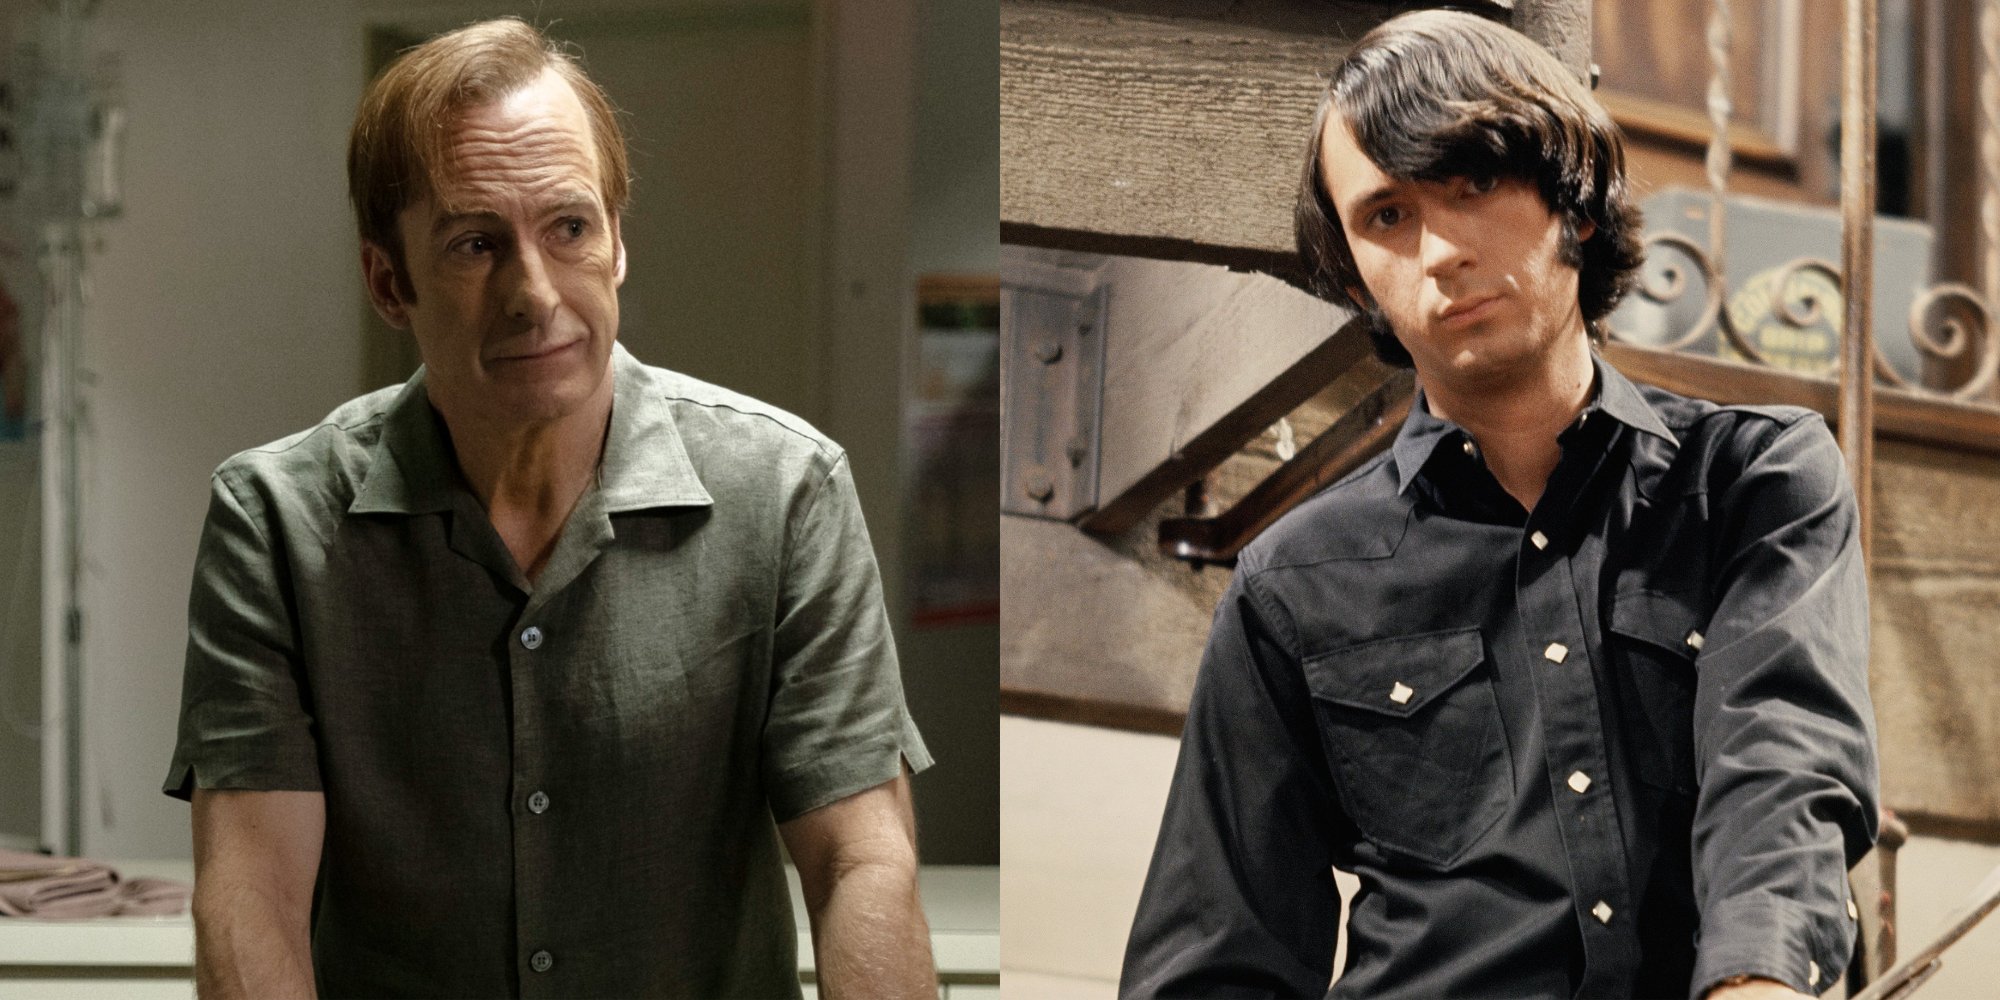 Bob Odenkirk as Jimmy McGill in 'Better Call Saul' Season 6, which used a song penned by Mike Nesmith 'Tapioca Tundra.'